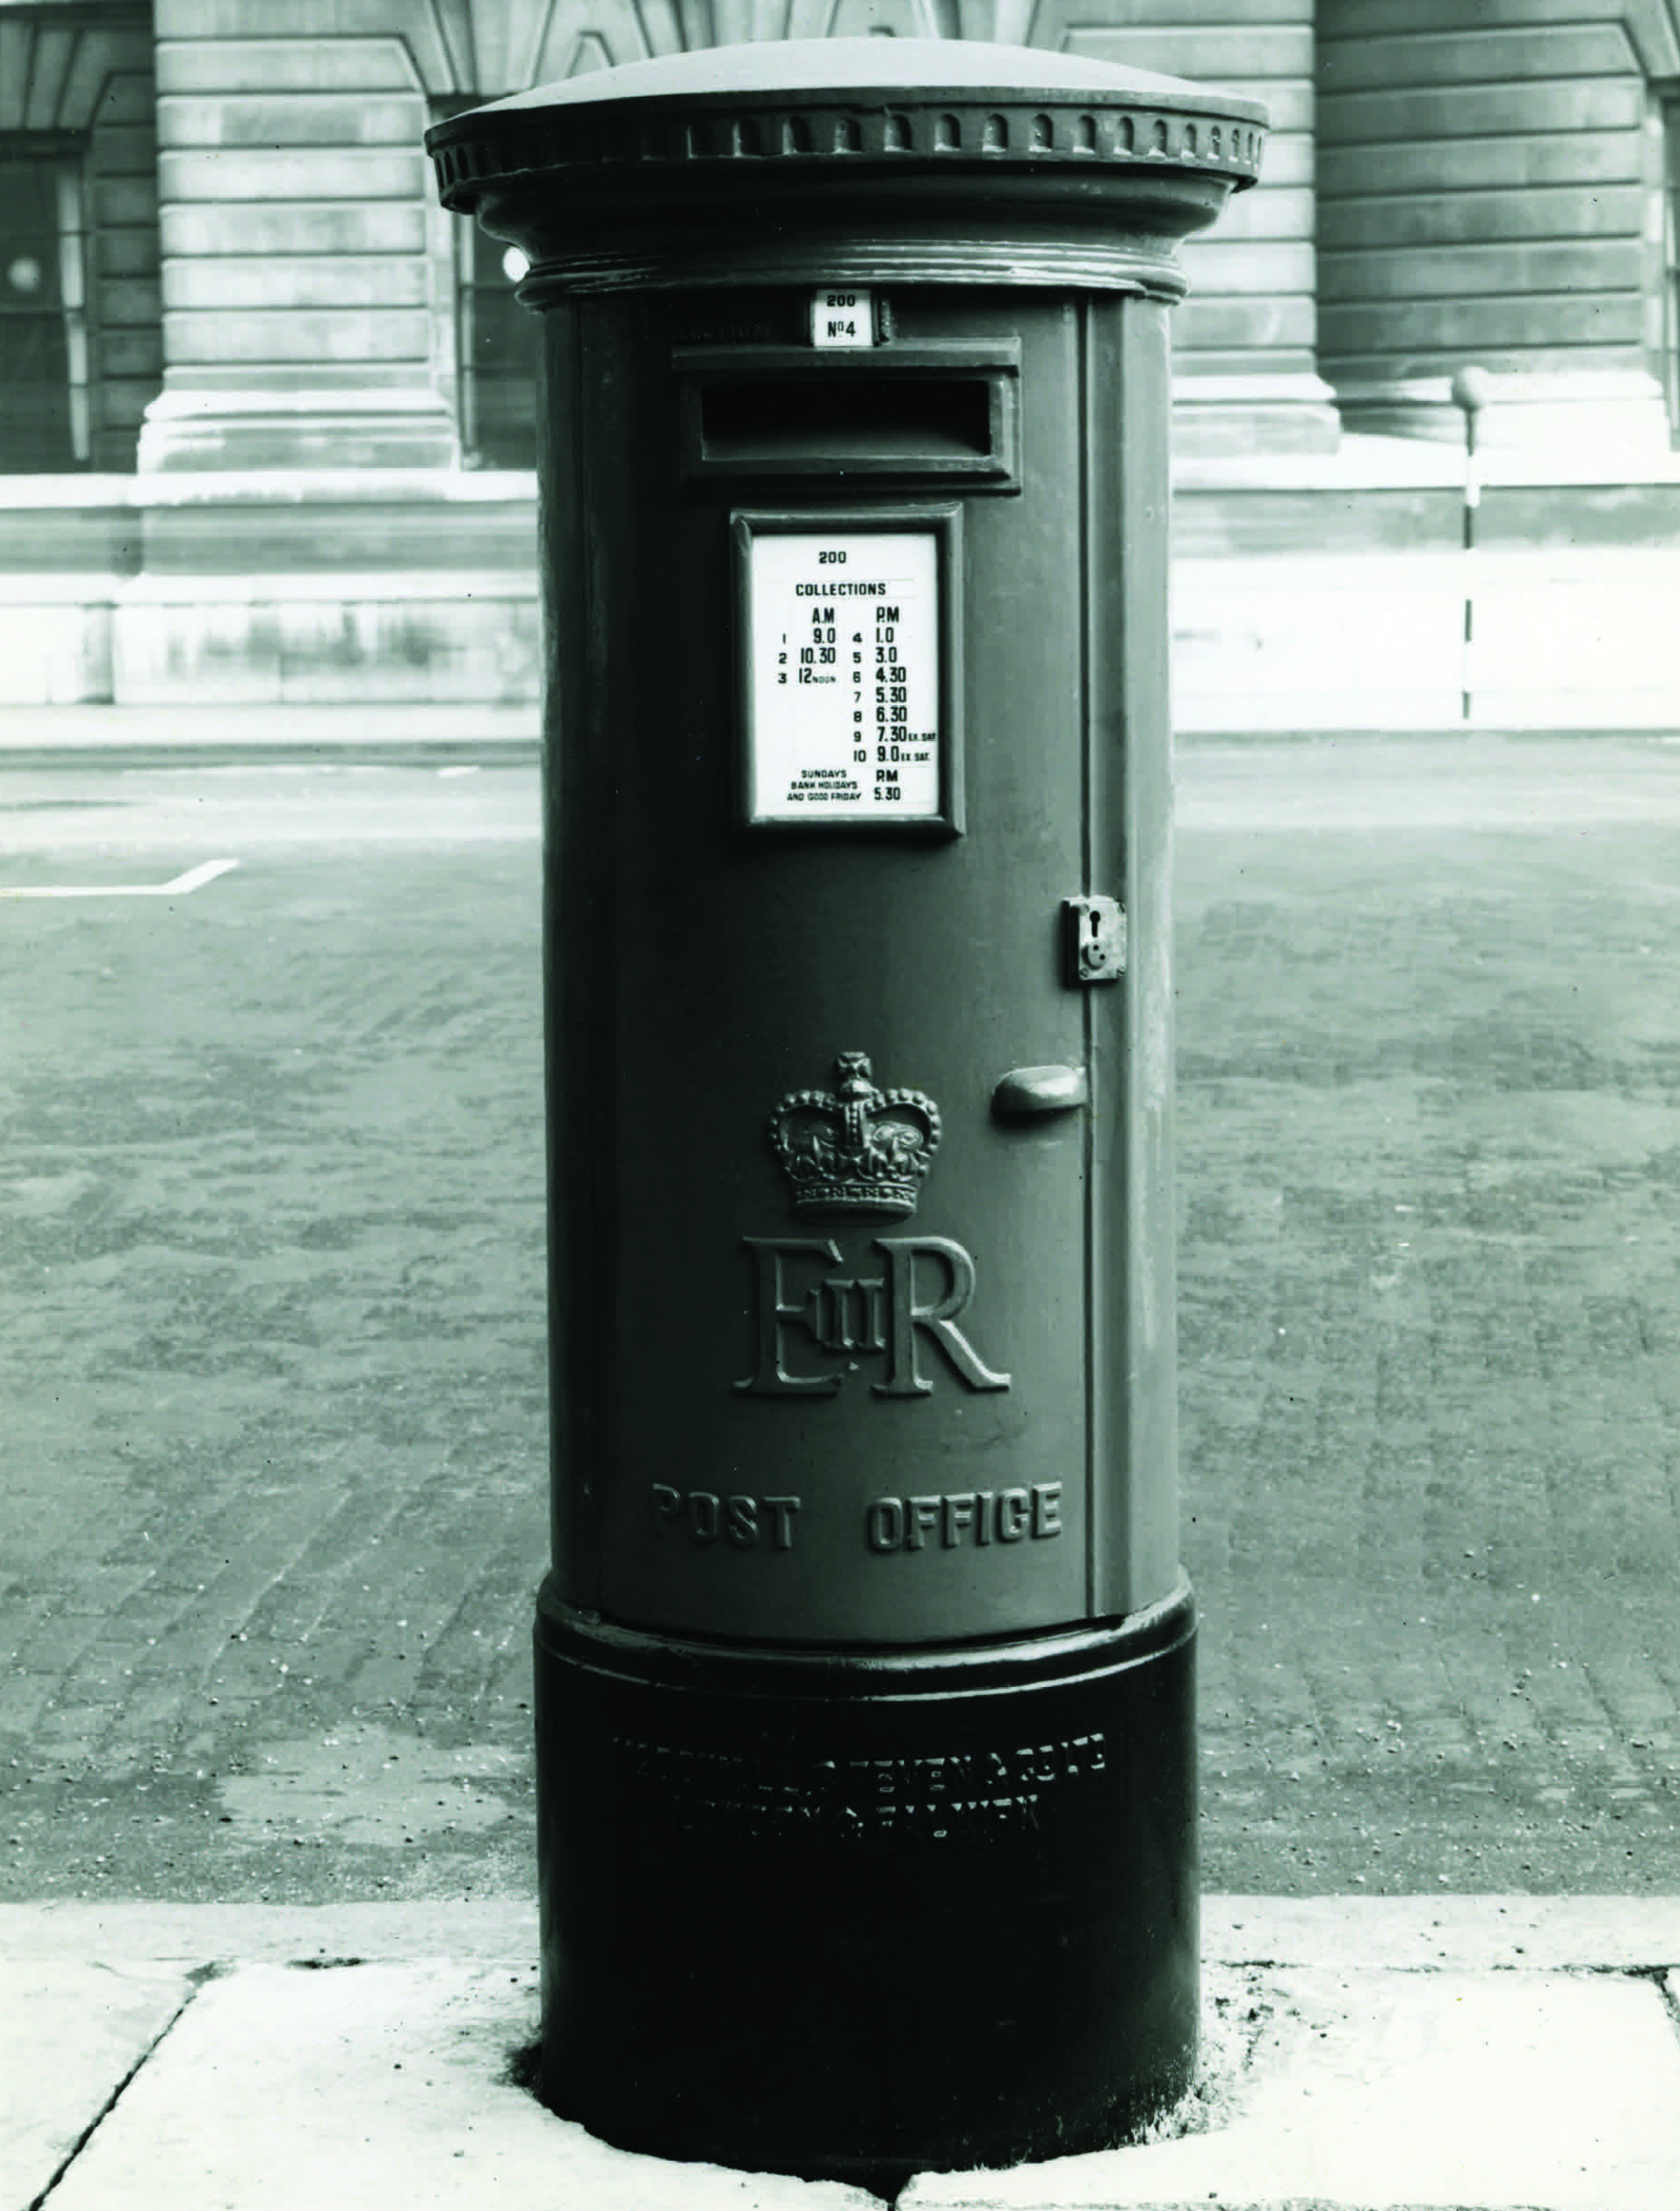 SEPTEMBER 2022 - WHAT DOES THE NEW KING MEAN FOR POST BOXES? - Letter Box  Study Group